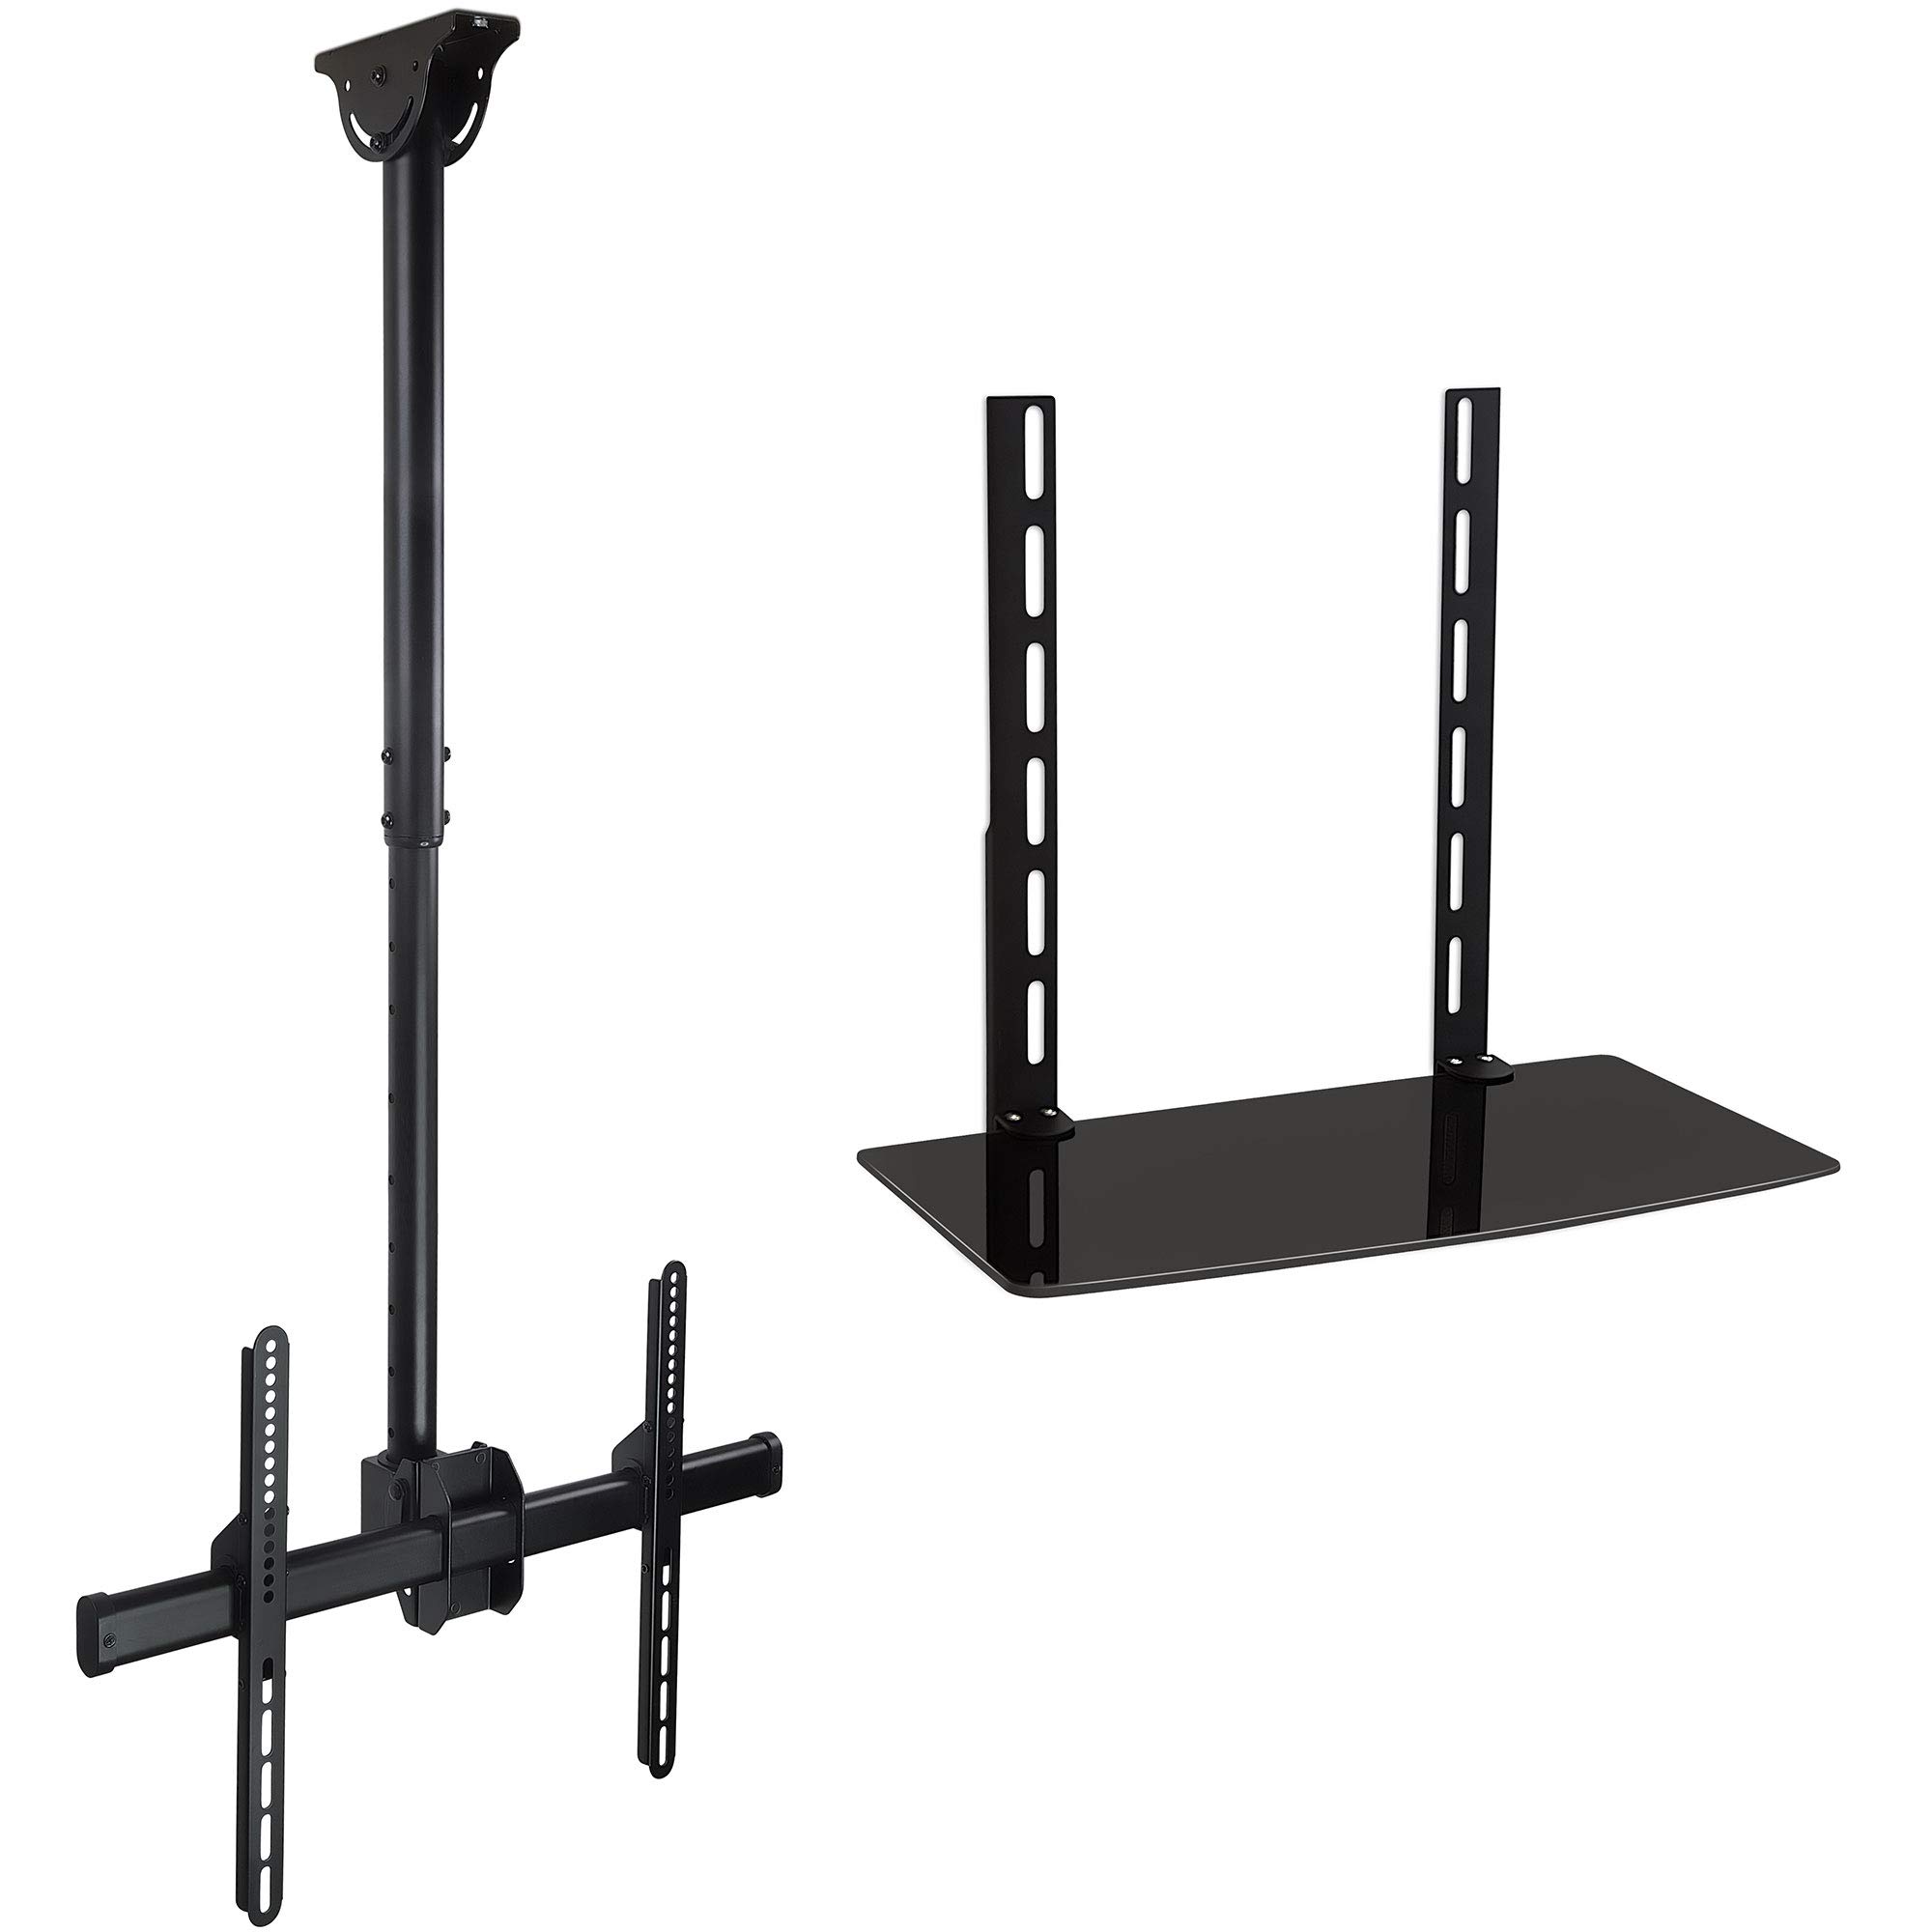 Mount-It Ceiling TV Mount Bracket, Fits 40-70 Inch Flat Panel Televisions, Adjustable Height Telescoping Tilt and Swivel and TV Wall Mount Shelf Bracket Under TV, Black